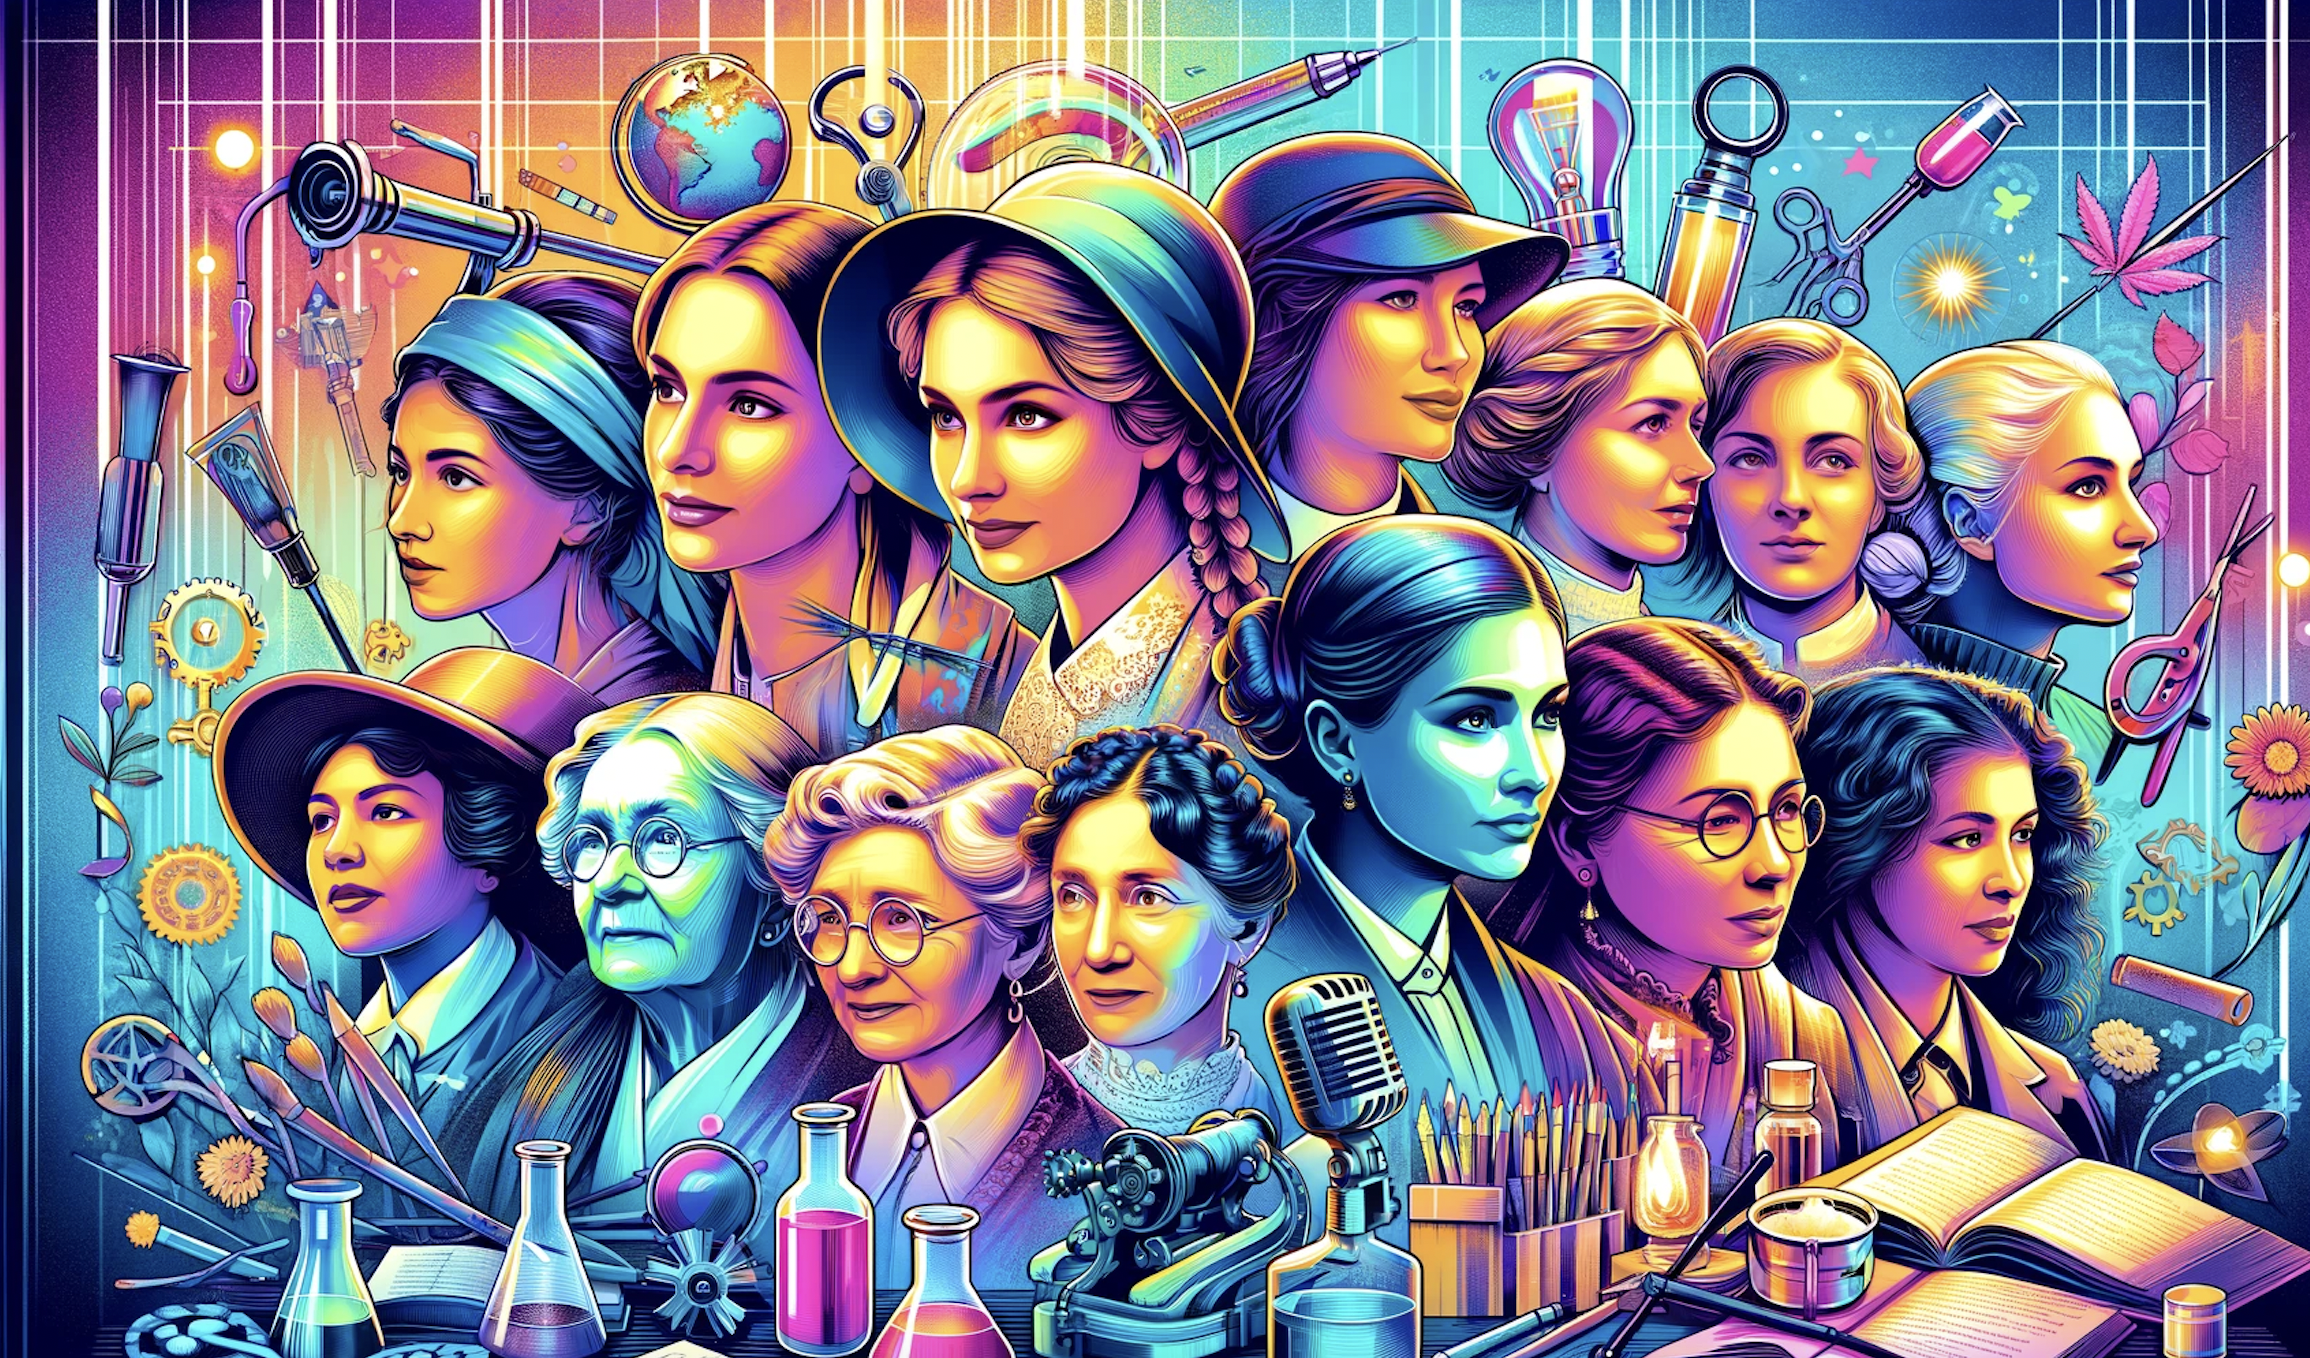 Celebrating Pioneers: Eight Women Who Shaped Our World